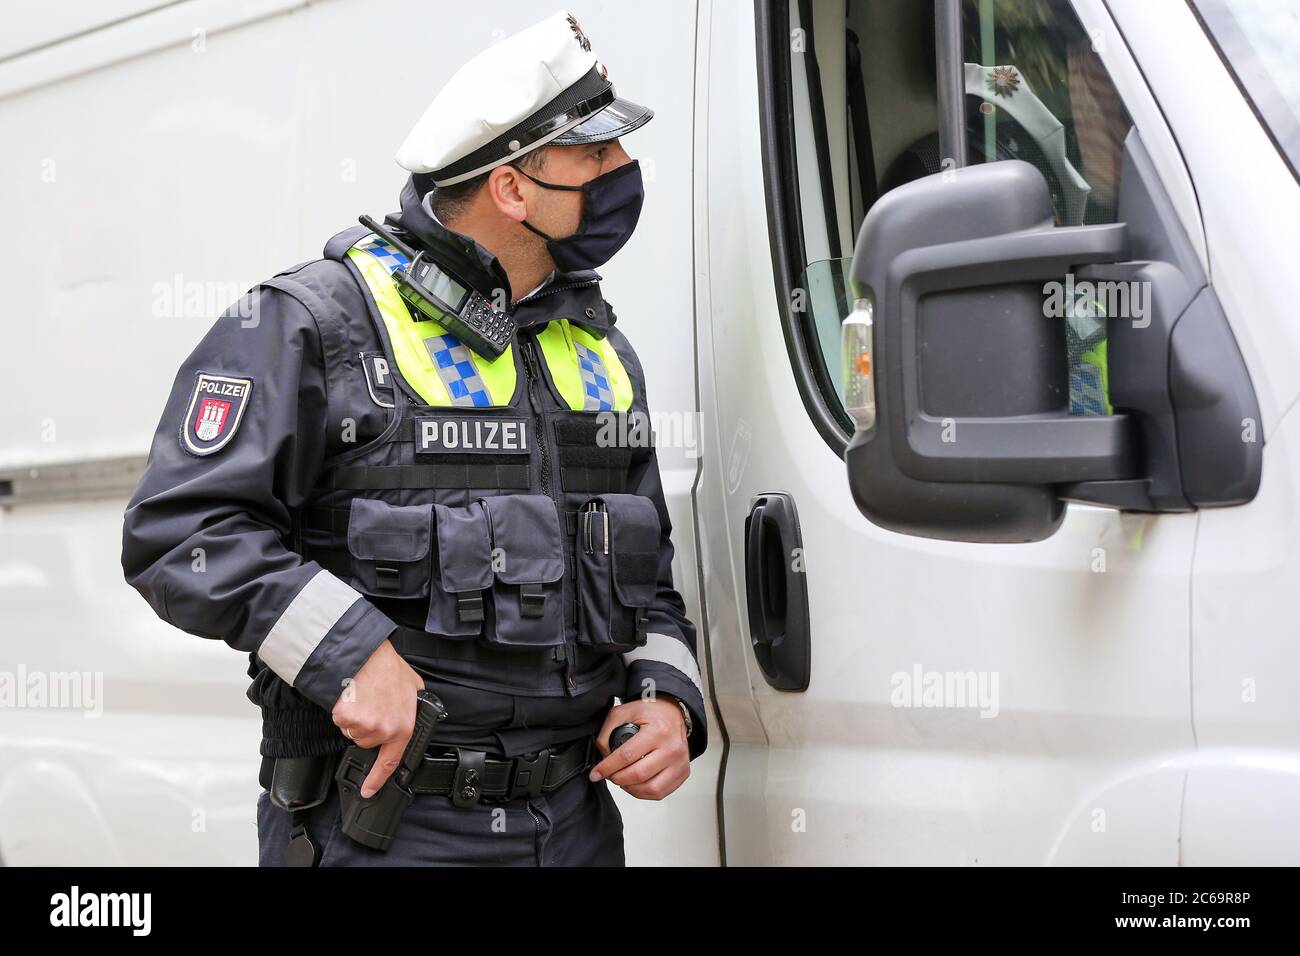 Hamburg, Germany. 24th Apr, 2020. A policeman is on duty at a police  control in Max-Brauer-Allee. He is holding a hand on his service weapon.  Hamburg police checked drivers in the Altona